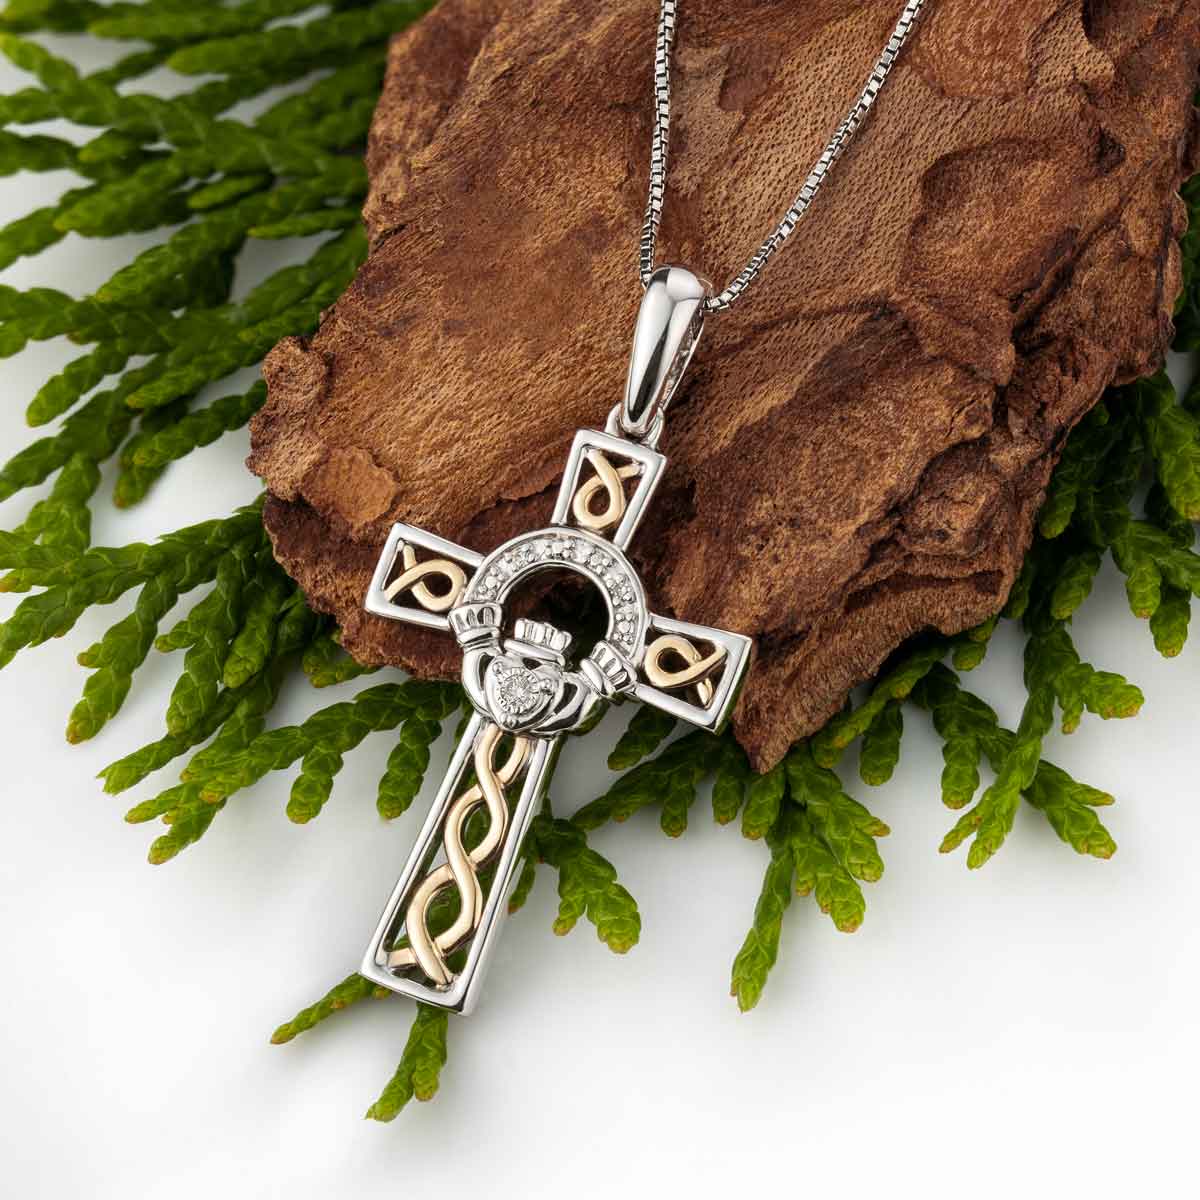 Product image for Claddagh Necklace - Silver, 10k Gold & Diamond Claddagh Cross Pendant